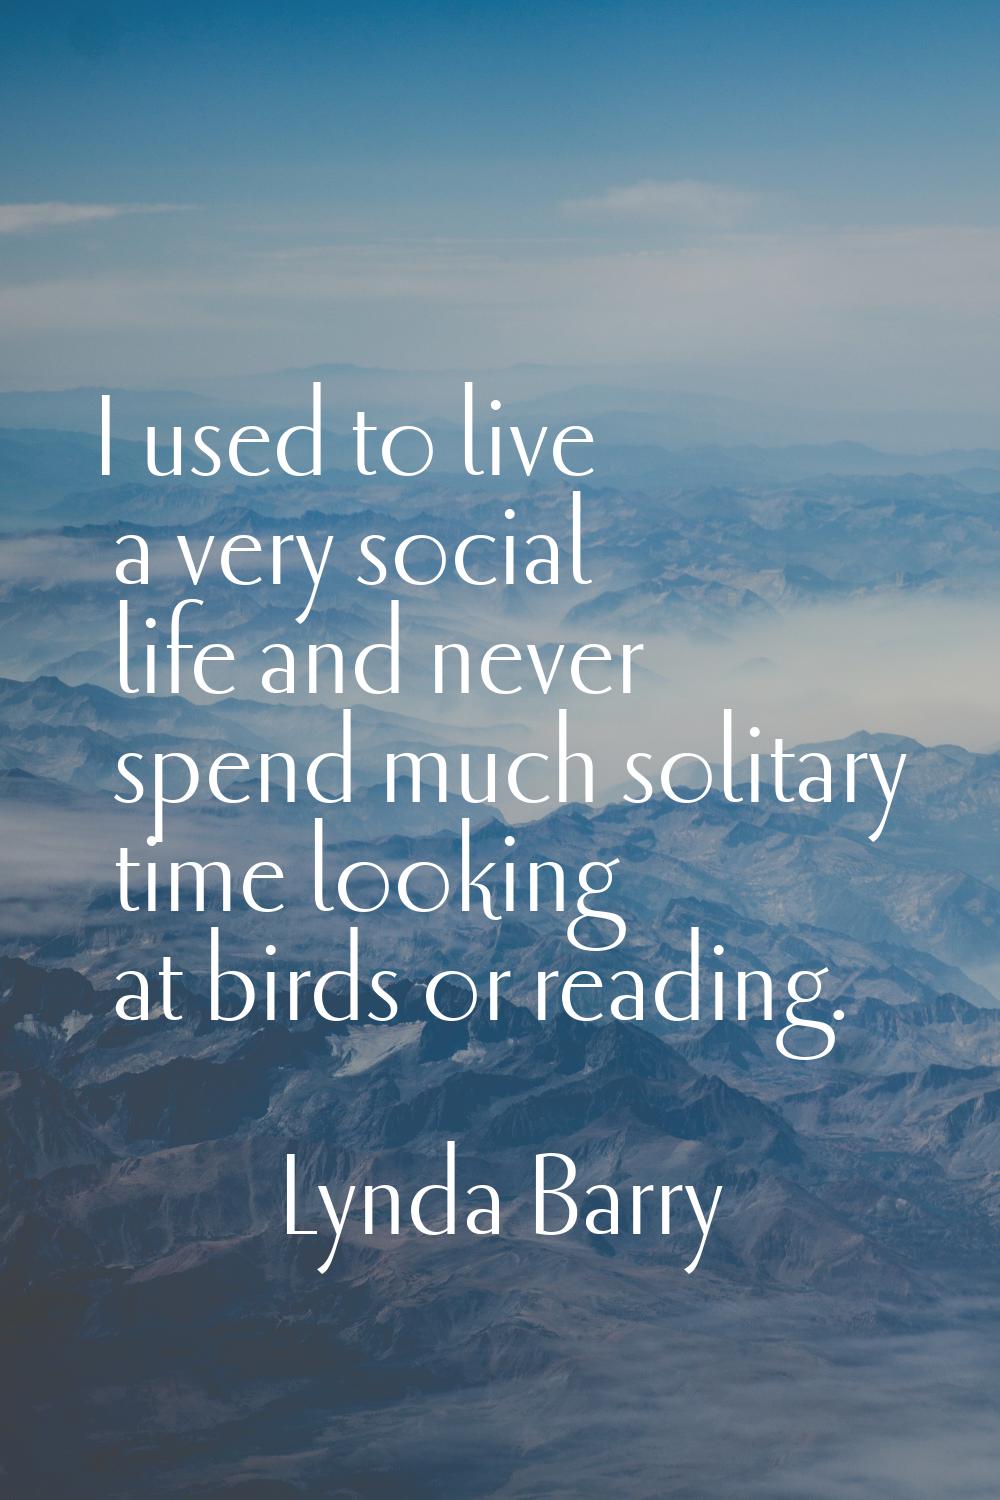 I used to live a very social life and never spend much solitary time looking at birds or reading.